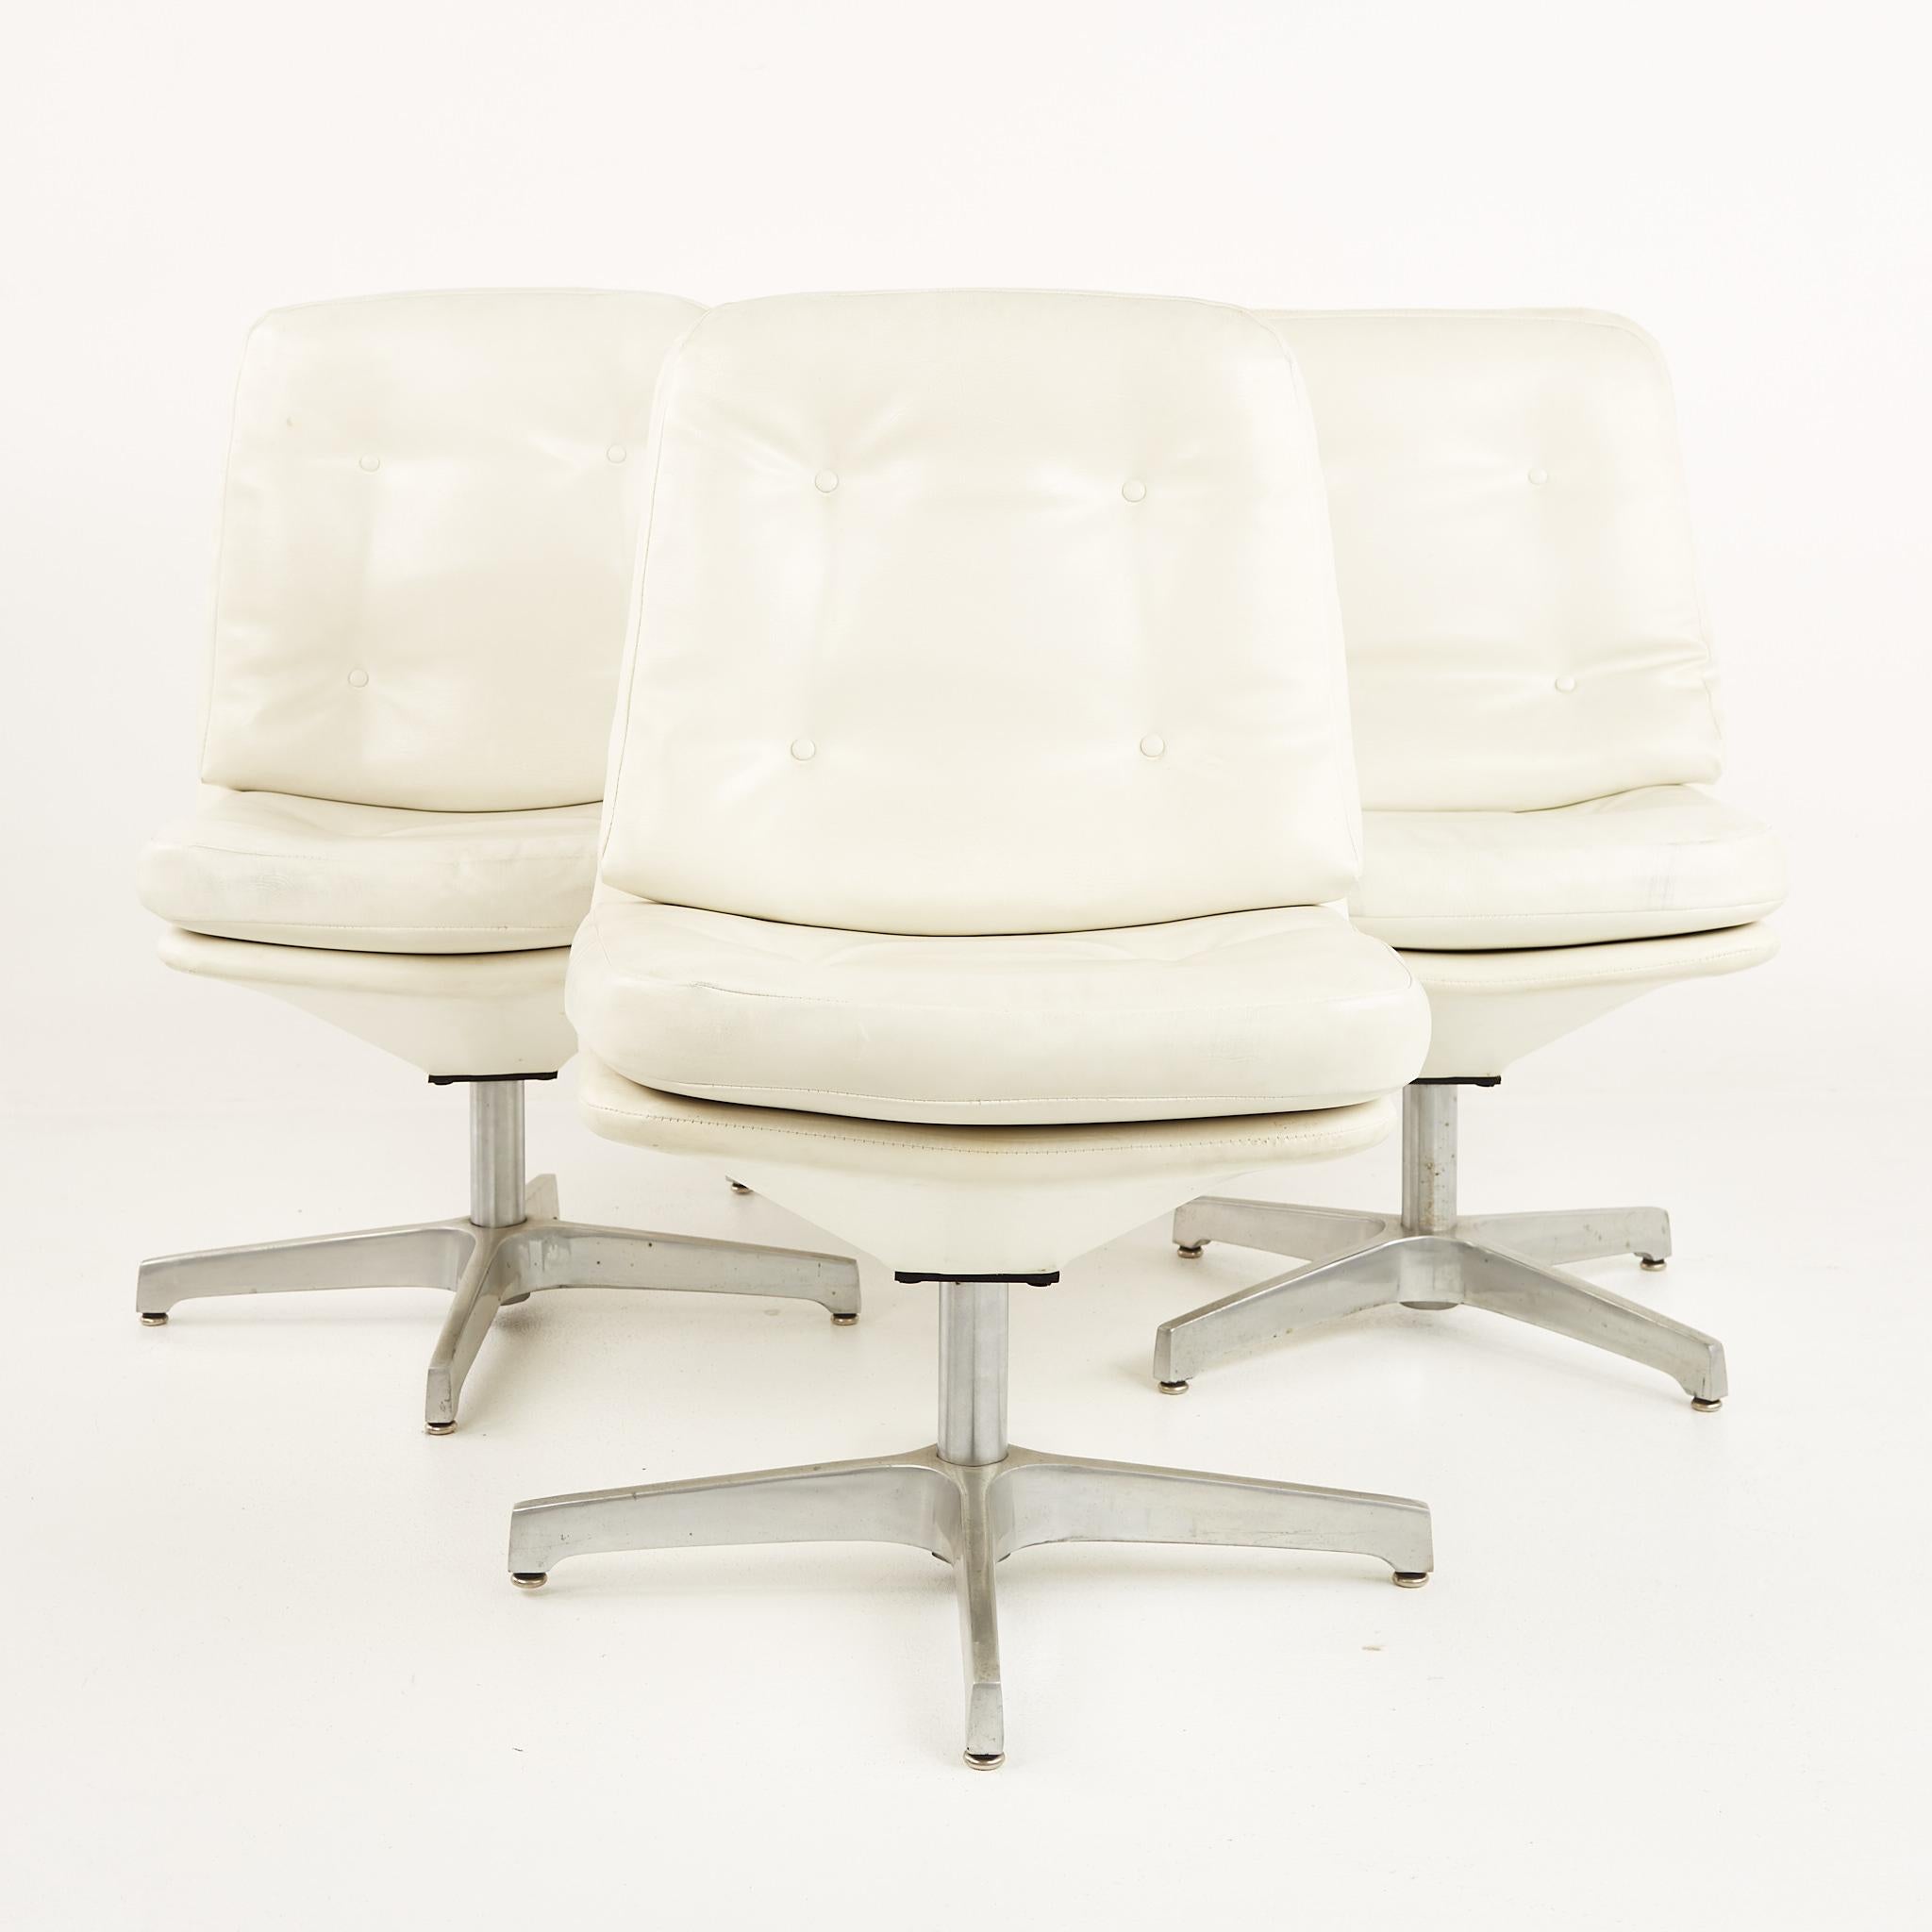 Chromcraft style mid century white vinyl and aluminum tufted swivel dining chairs - set of 4

Each chair measures: 21 wide x 25 deep x 32.5 inches high, with a seat height of 17.5 inches

All pieces of furniture can be had in what we call